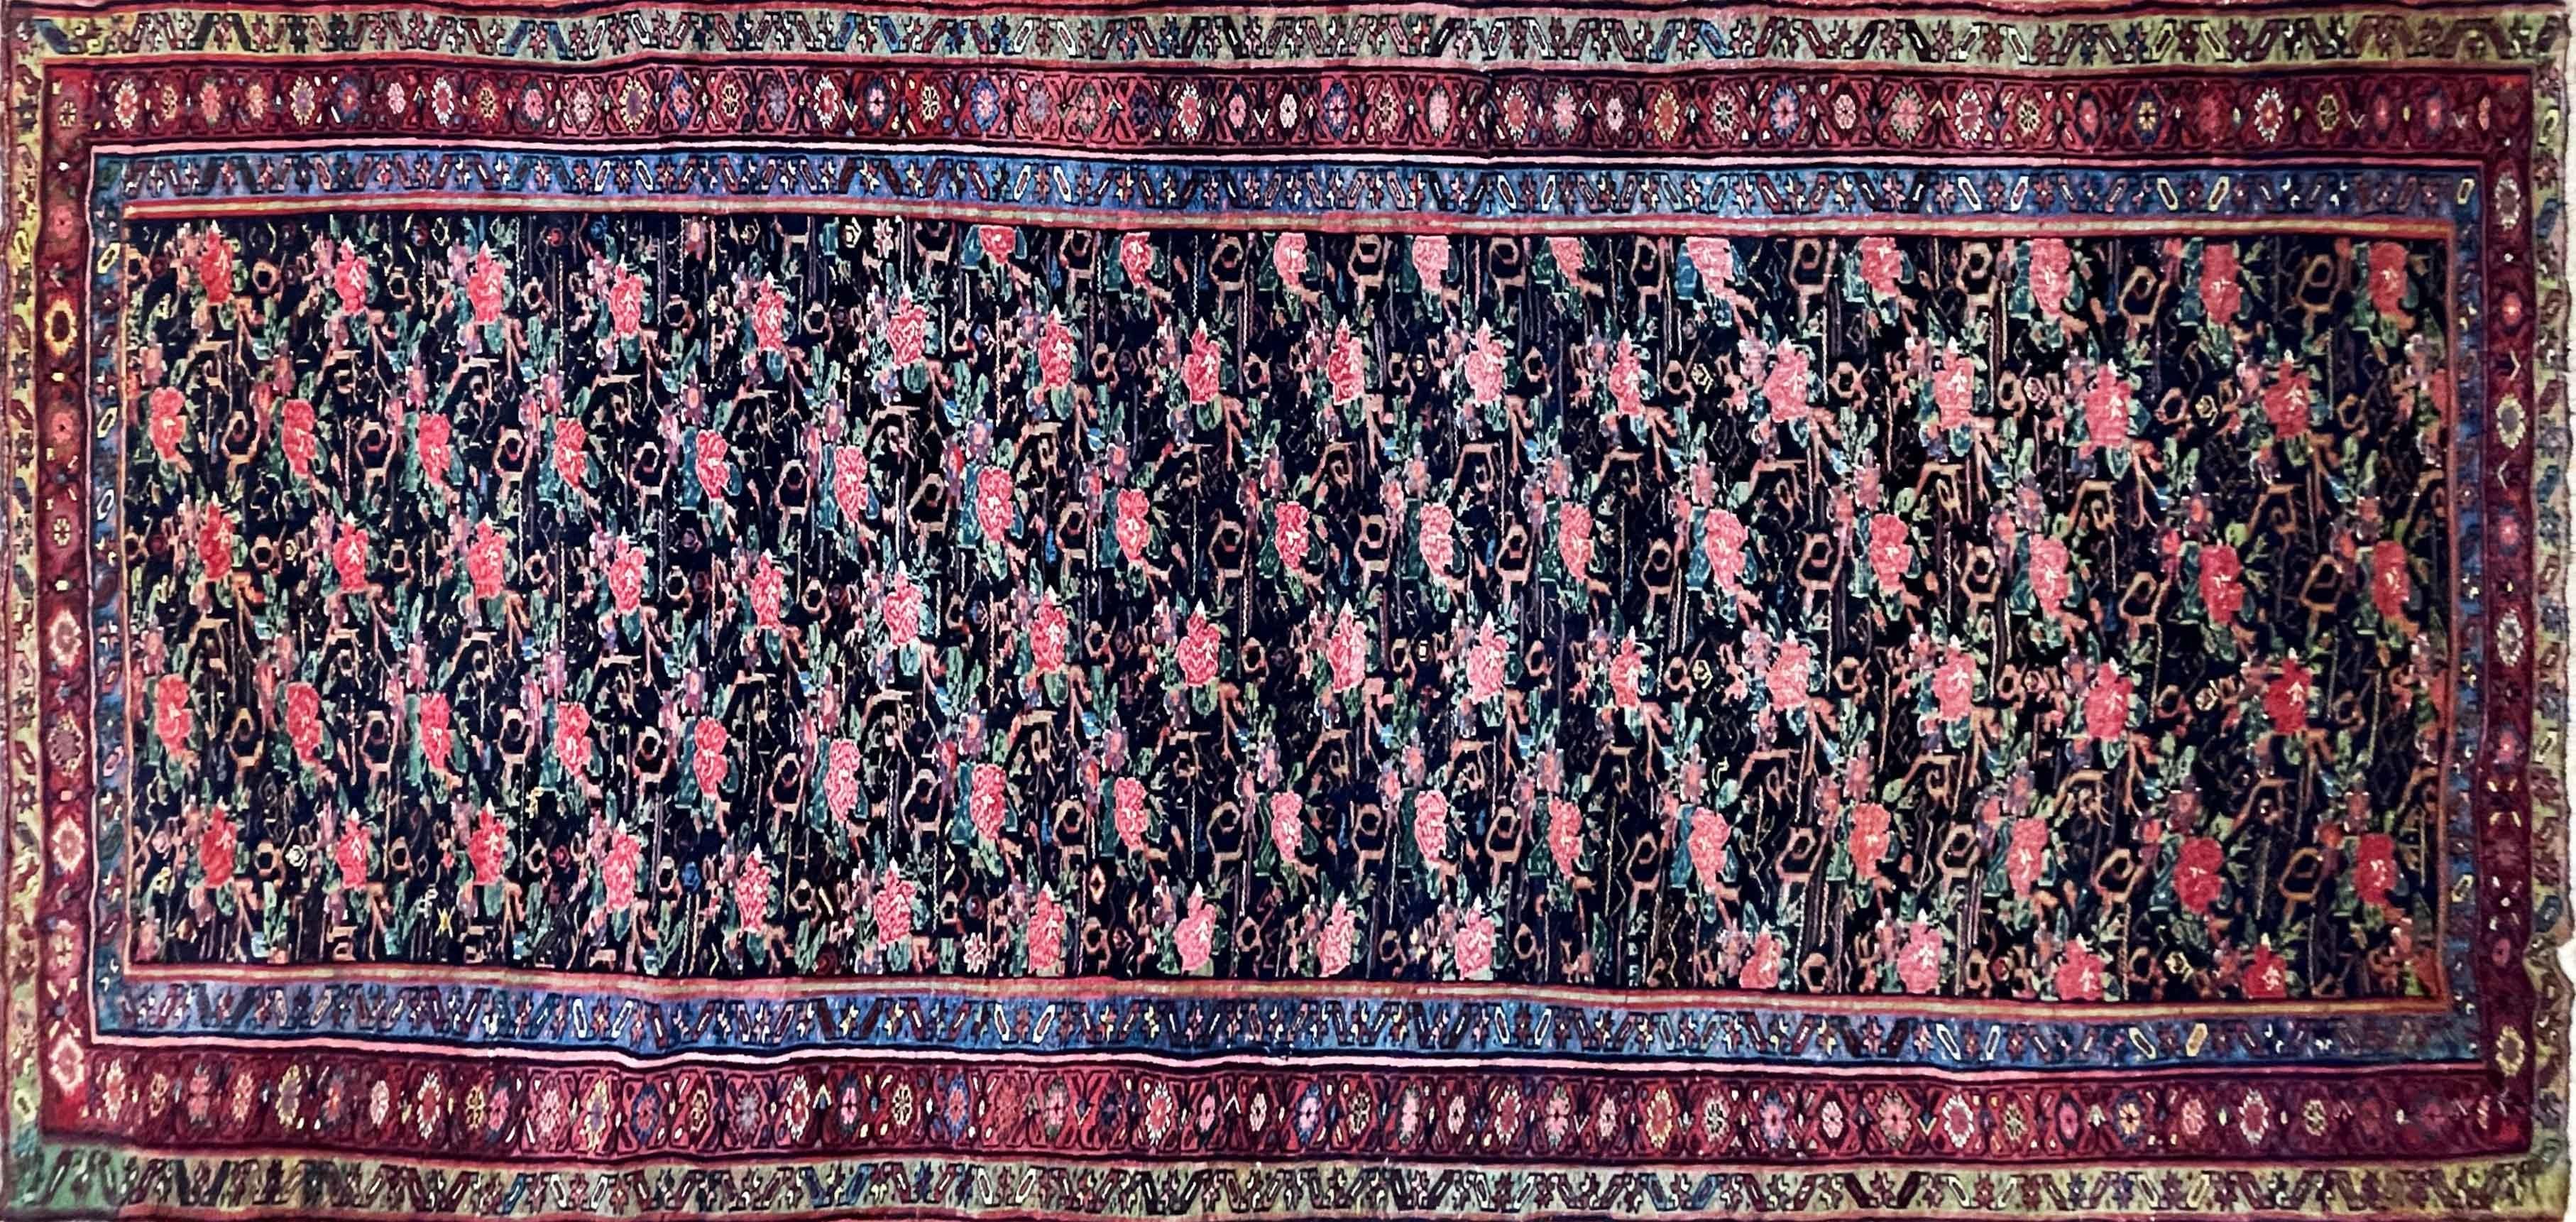 Exquisite Antique Persian Kurdish Bijar Halvayi Carpet - A Timeless Work of Art

Step into a world of captivating beauty with this absolutely stunning antique Persian Kurdish Bijar Halvayi carpet, dating back to the 1900's. Measuring a graceful 5'4